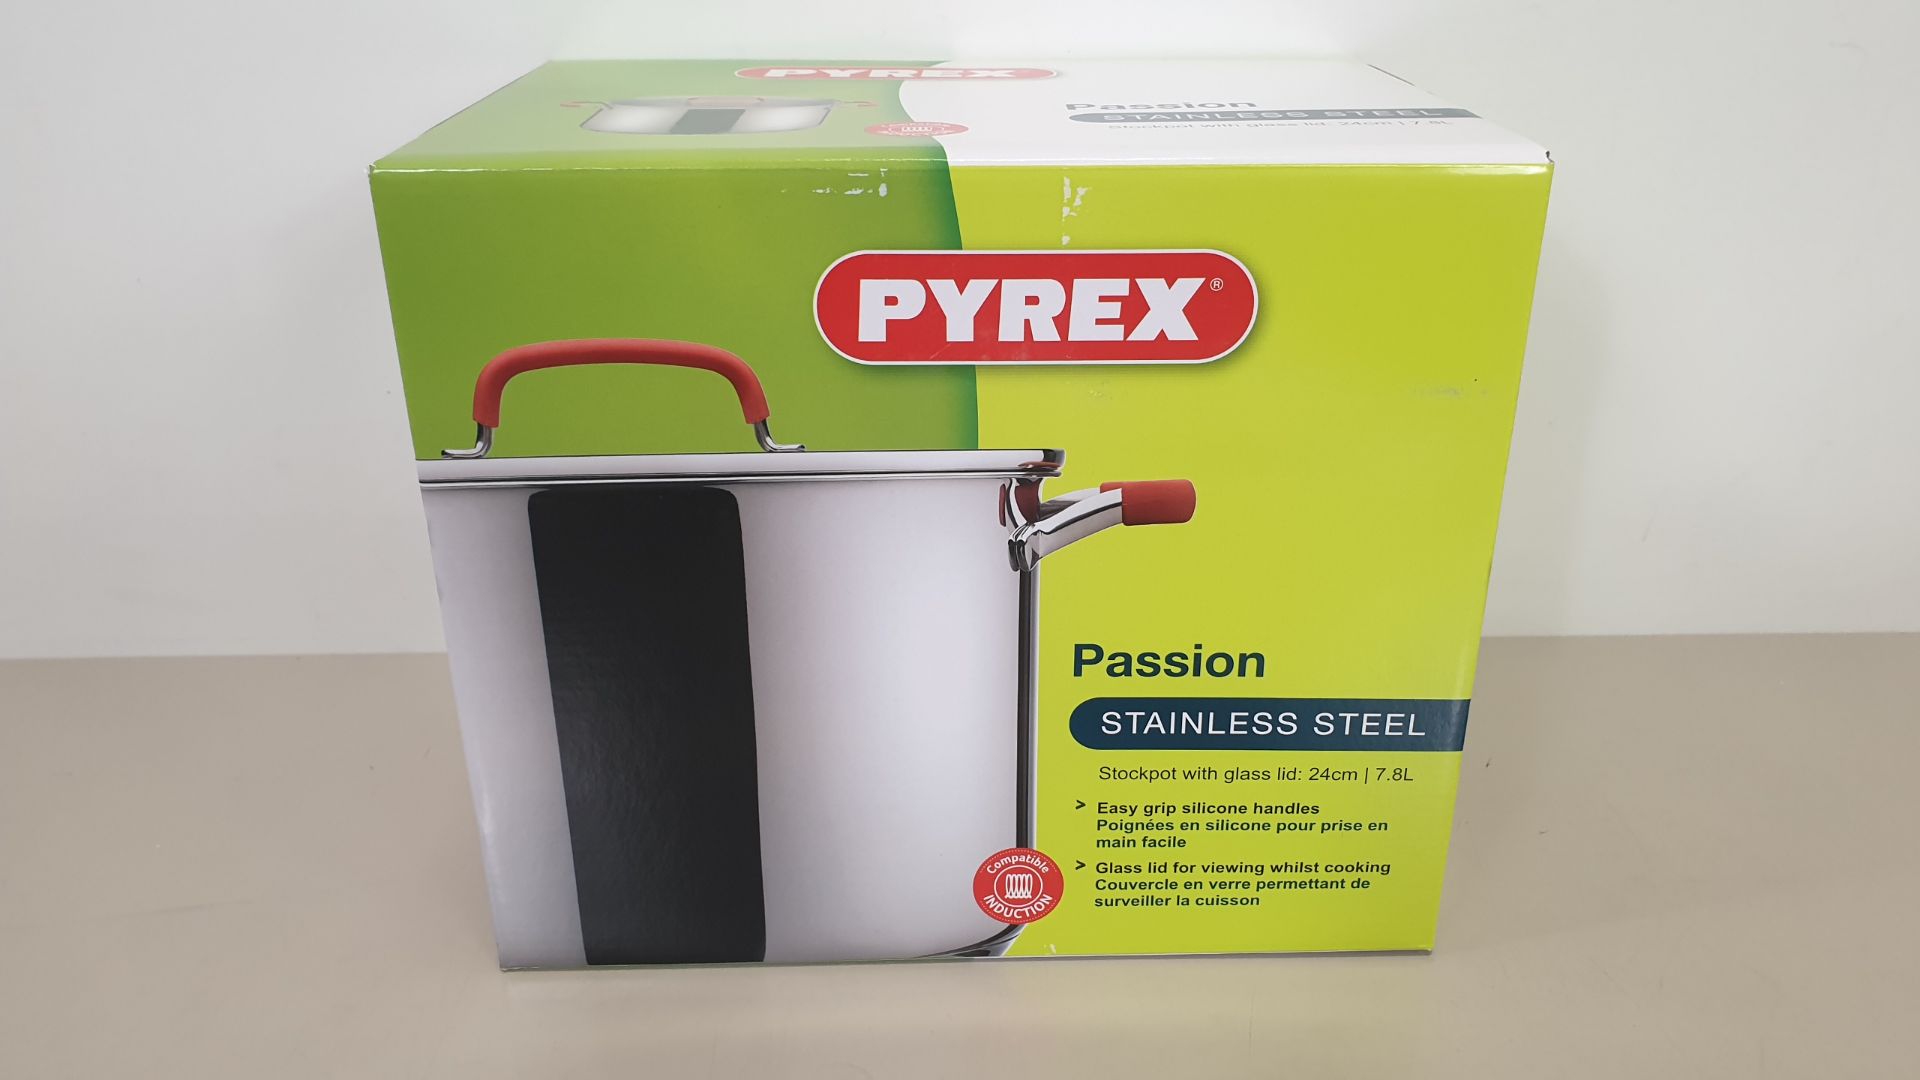 6 X BRAND NEW PYREX STAINLESS STEAL 24CM STOCKPOT WITH GLASS LID, 7.8L - IN 3 BOXES